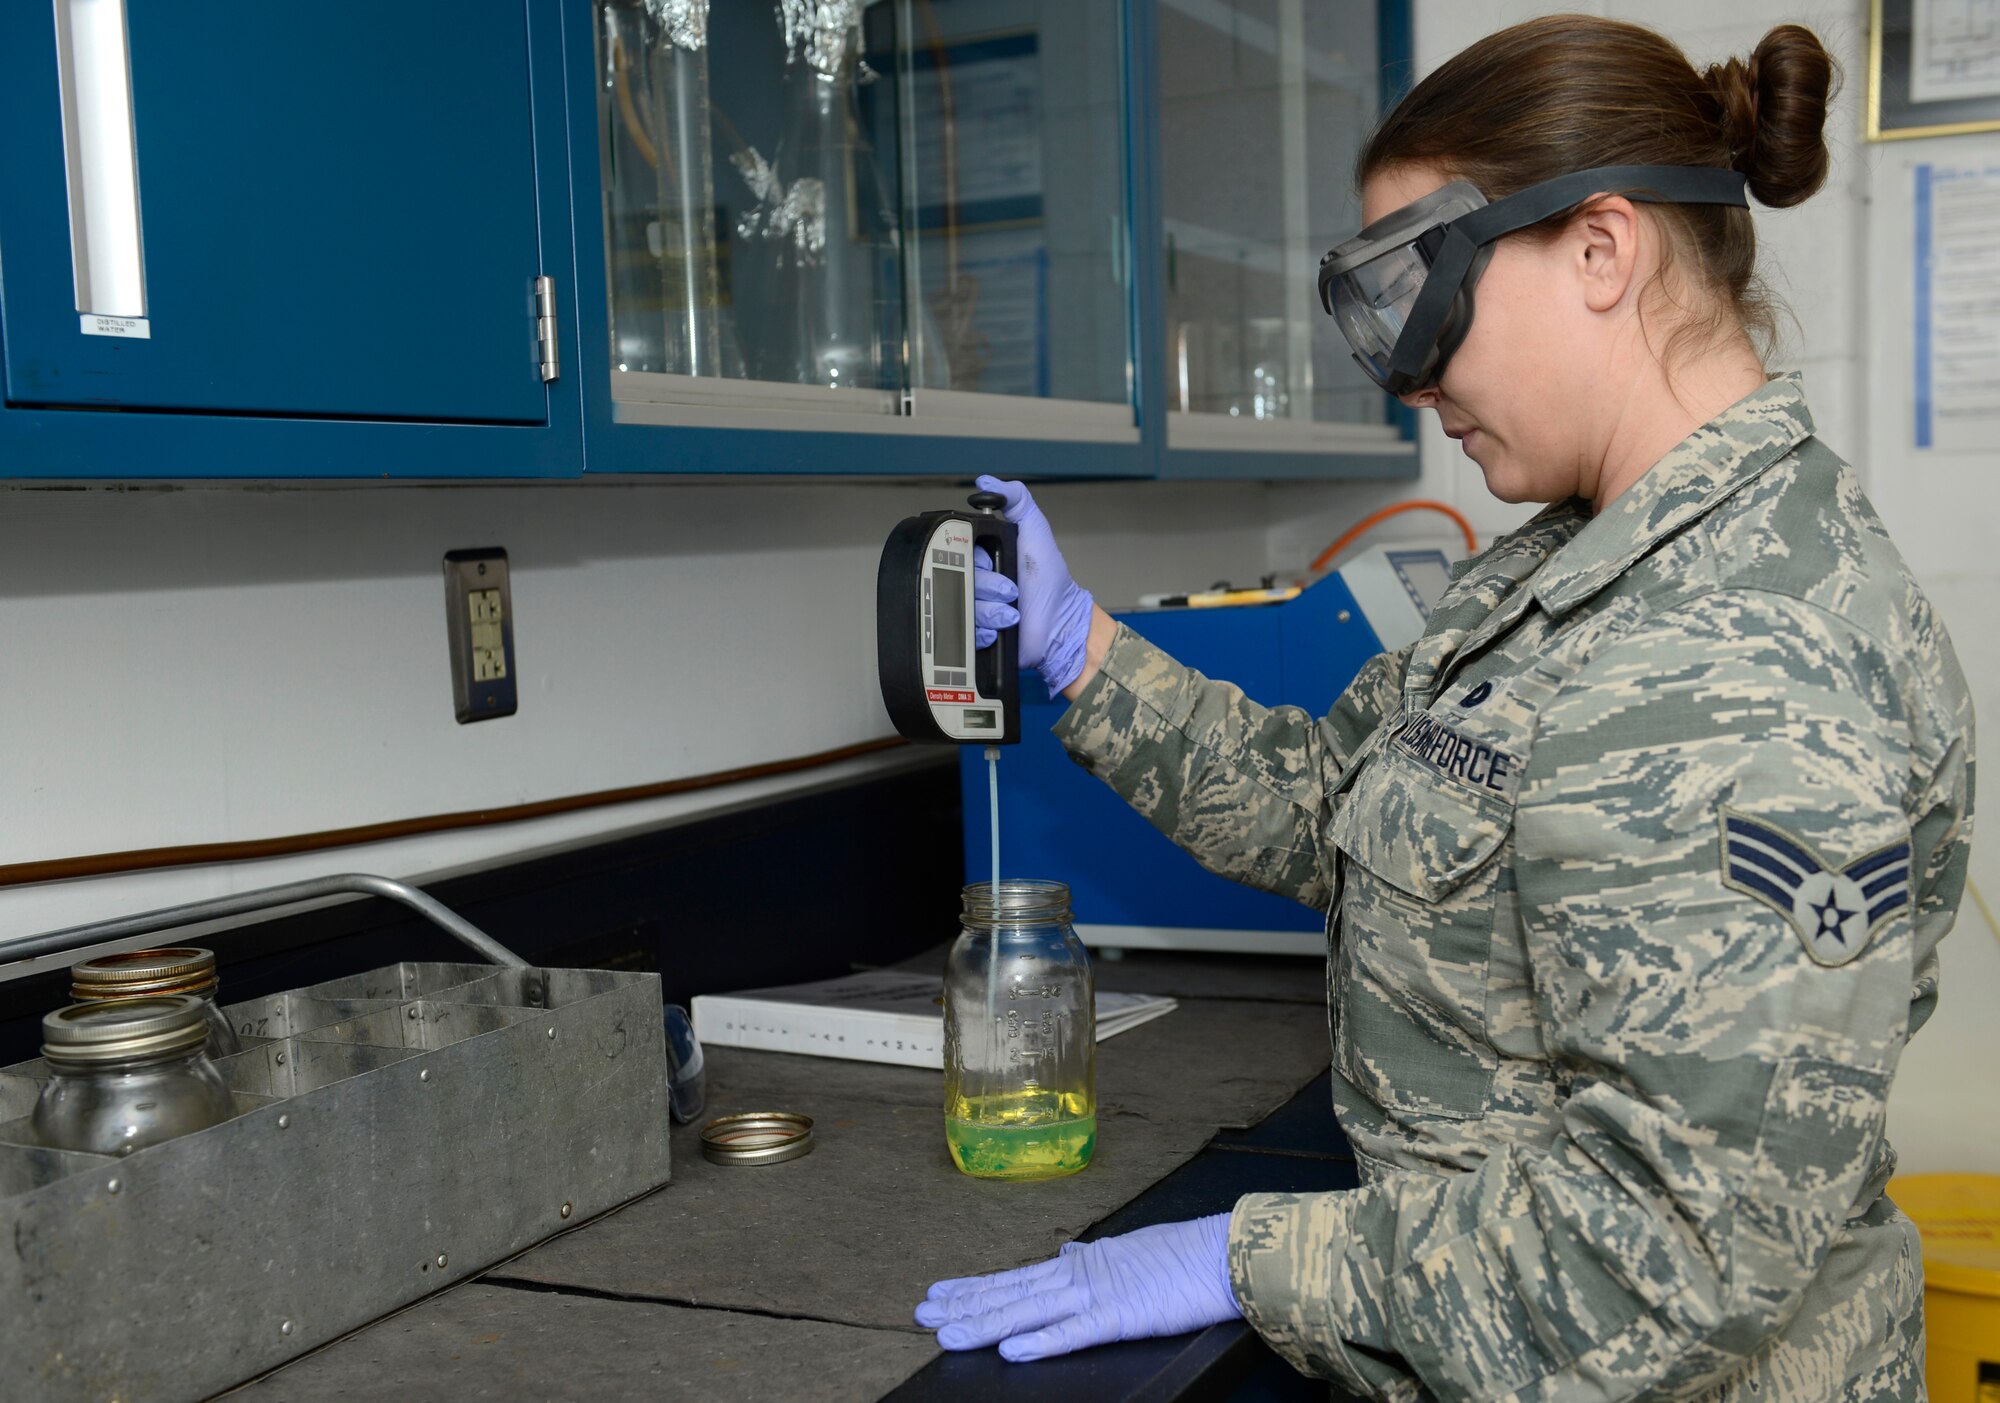 U.S. Air Force Senior Airman Brittany Litton, 733rd Logistics Readiness Squadron fuels laboratory technician, tests the quality of diesel fuel at Joint Base Langley-Eustis, Va., Jan. 6, 2017. The laboratory uses multiple tests and equipment to ensure the highest quality product is provided to the 1st Fighter Wing and their mission partners. (U.S. Air Force photo by Airman 1st Class Kaylee Dubois)